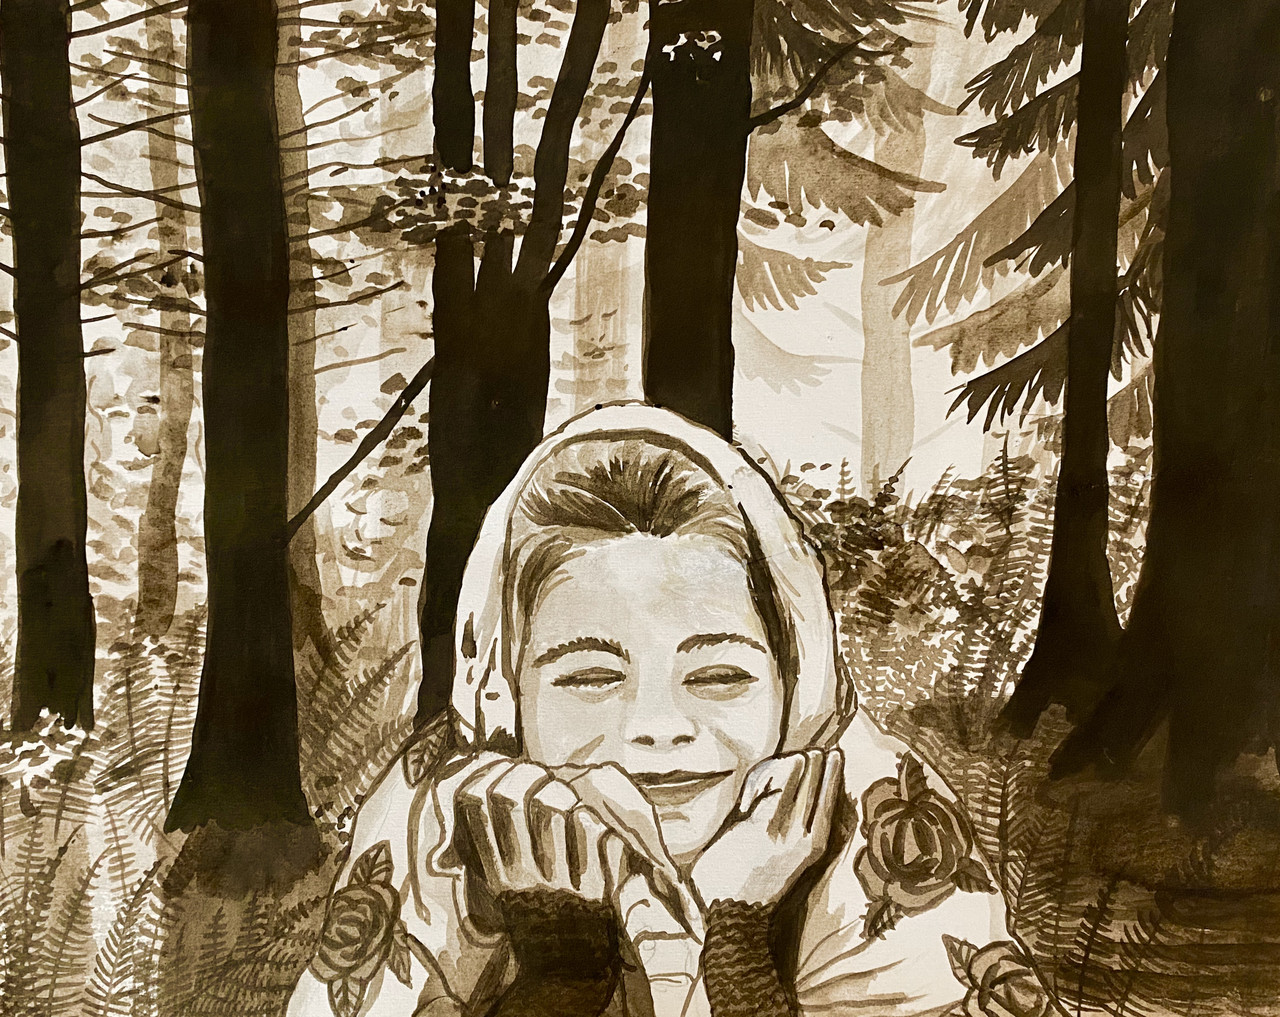 Sepia tone drawing of a young girl smiling in a forest.